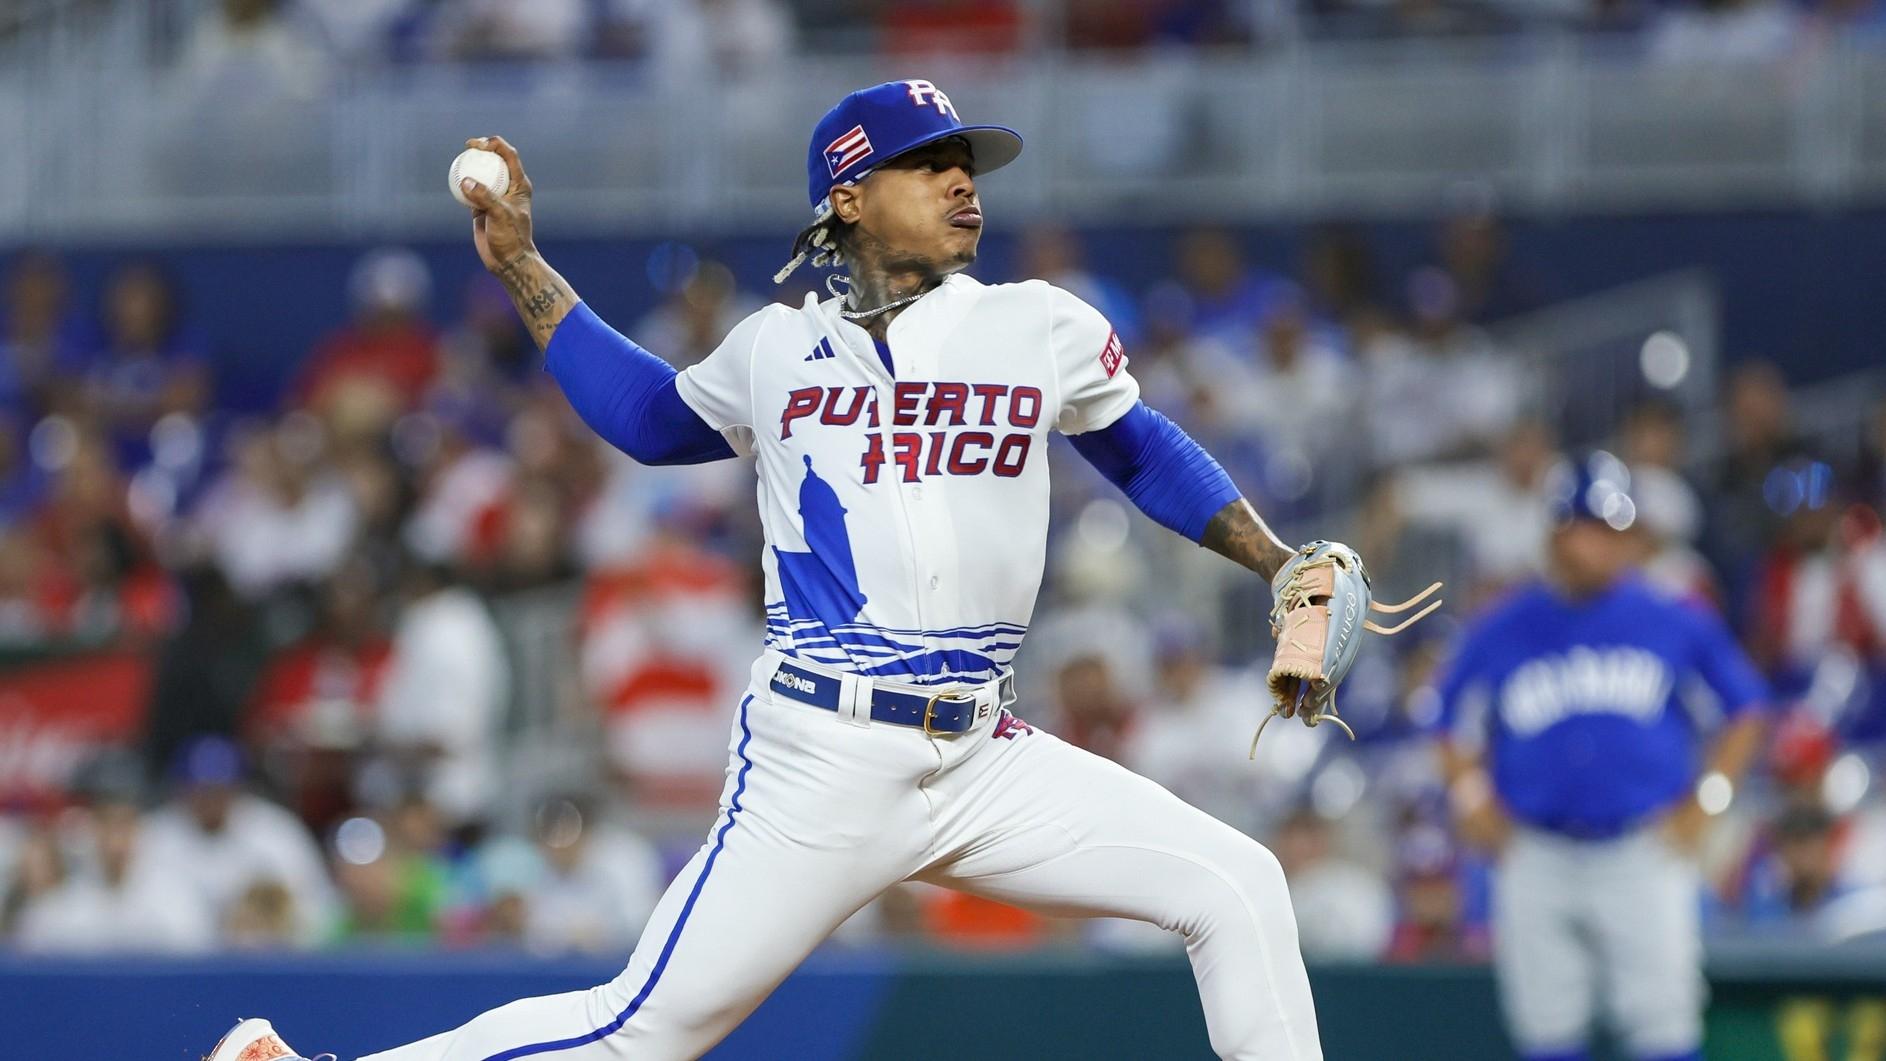 Puerto Rico starting pitcher Marcus Stroman (0) delivers a pitch during the second inning against Nicaragua at LoanDepot Park. / Sam Navarro-USA TODAY Sports